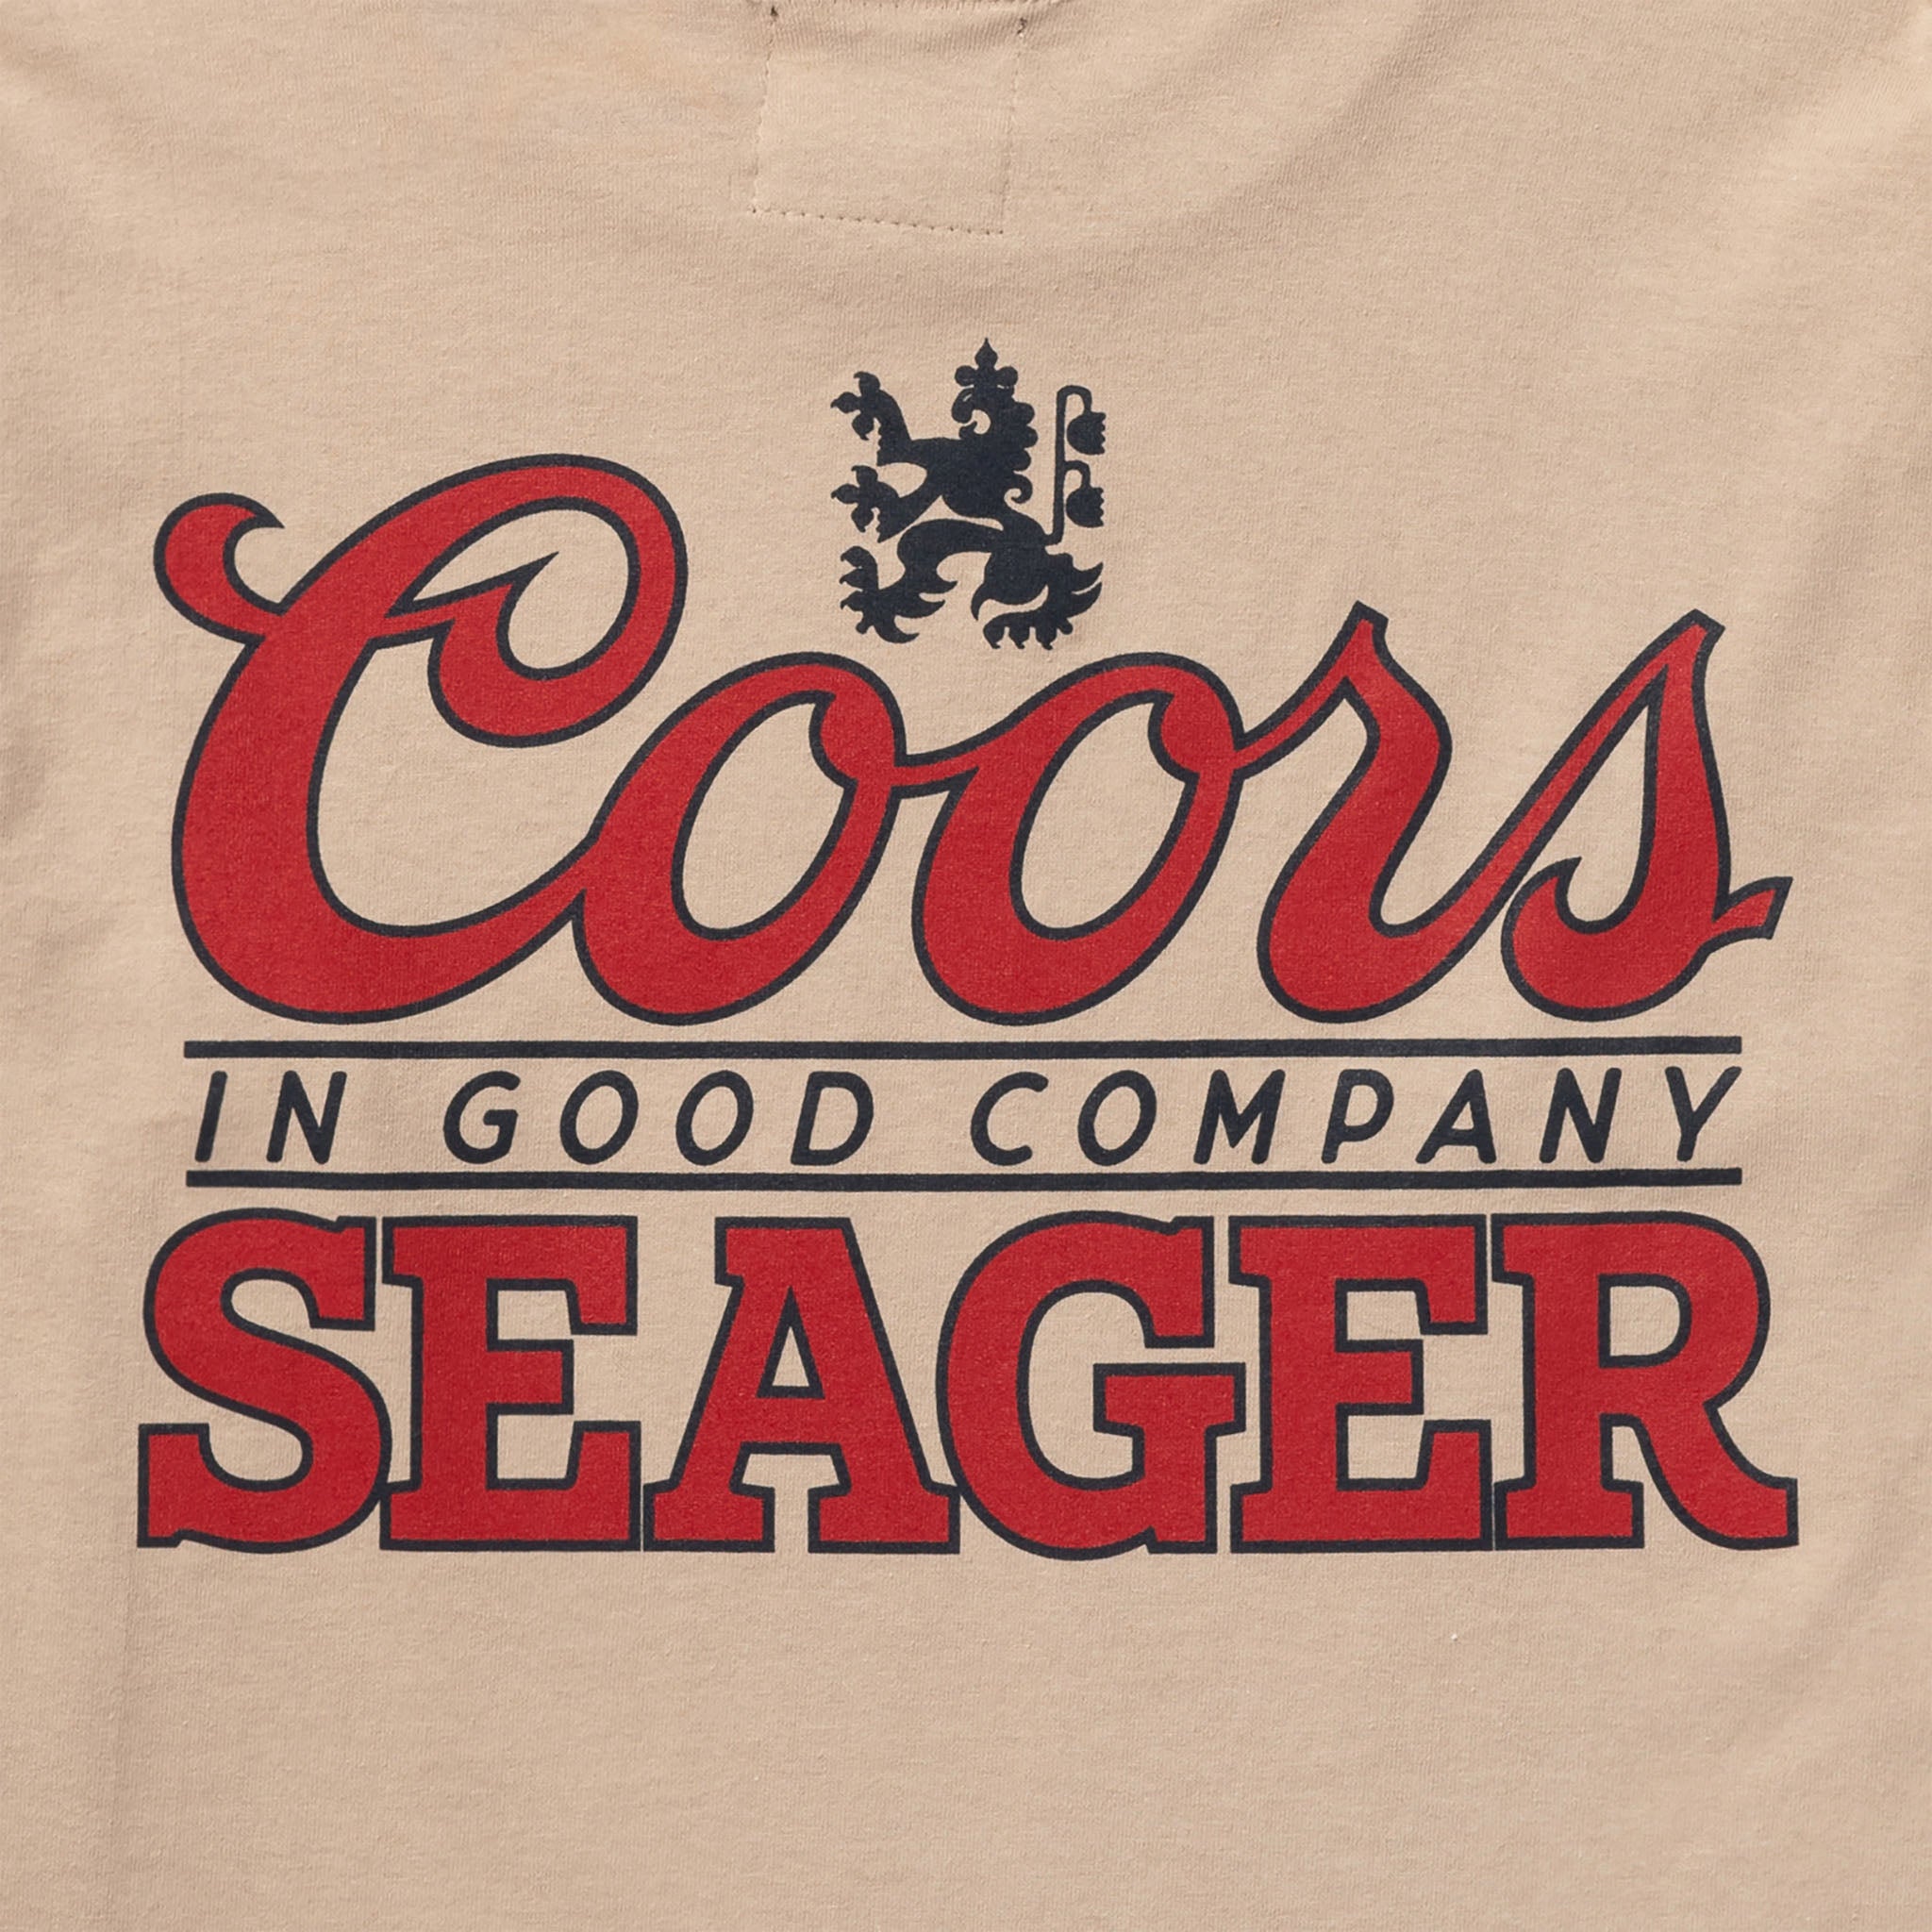 SEAGER X COORS BANQUET BRAND L/S TEE SAND